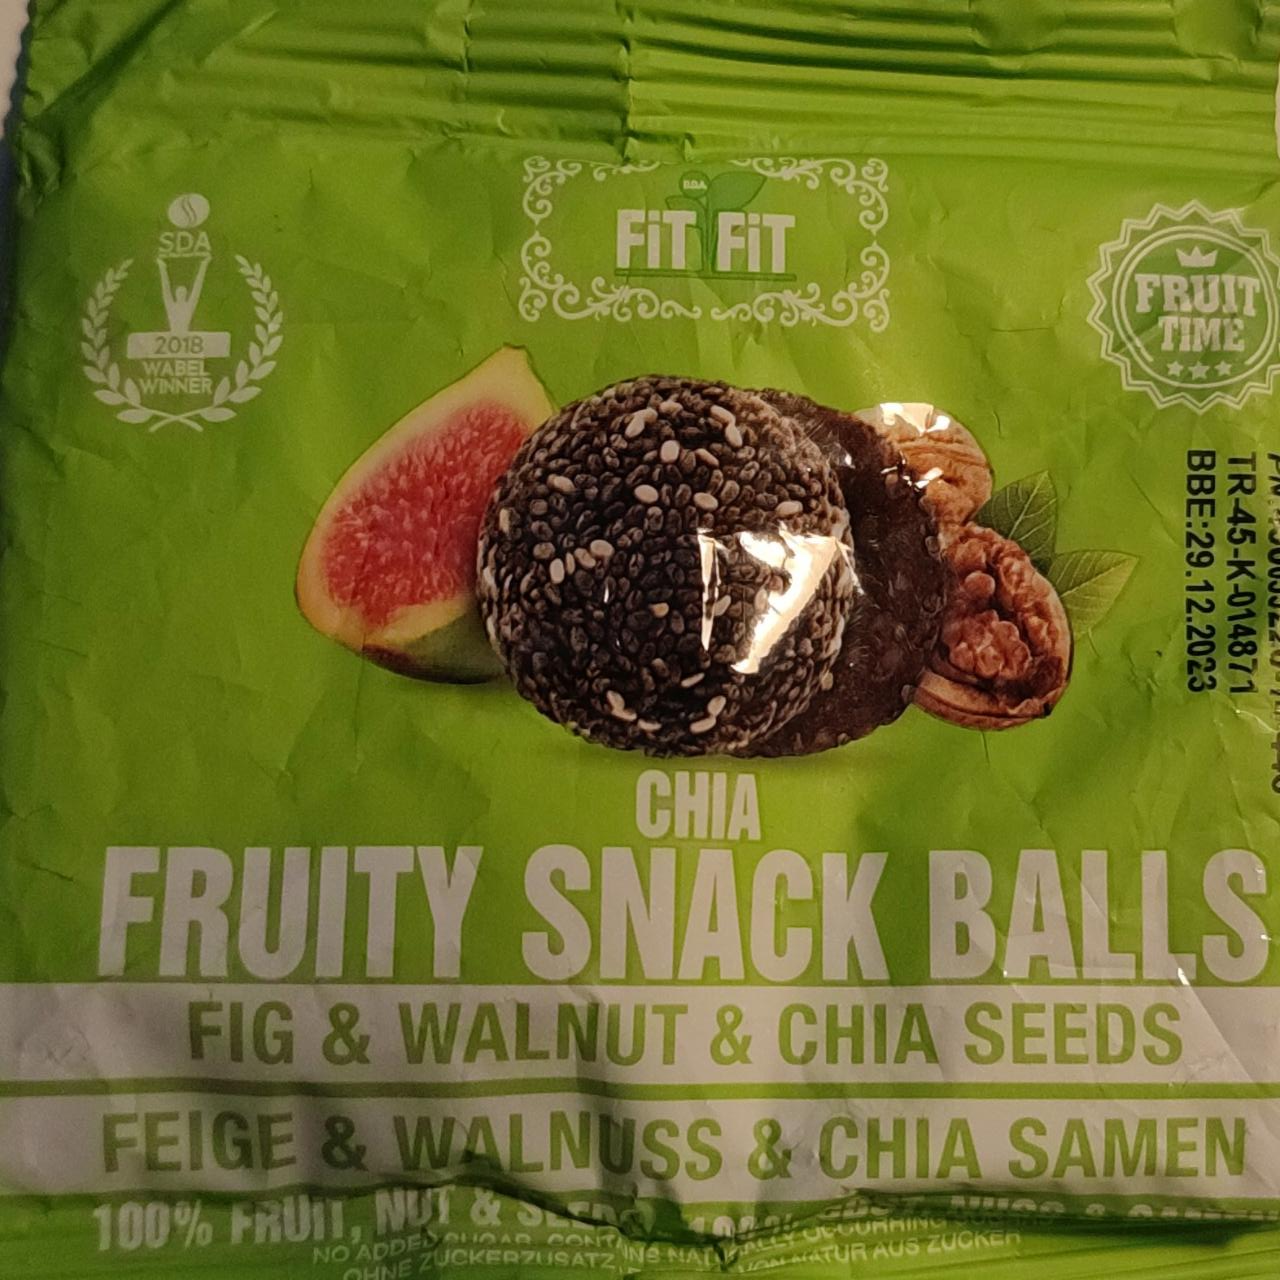 Fotografie - Chia Fruity Snack Balls Fig & Walnut & Chia Seeds FiT FiT